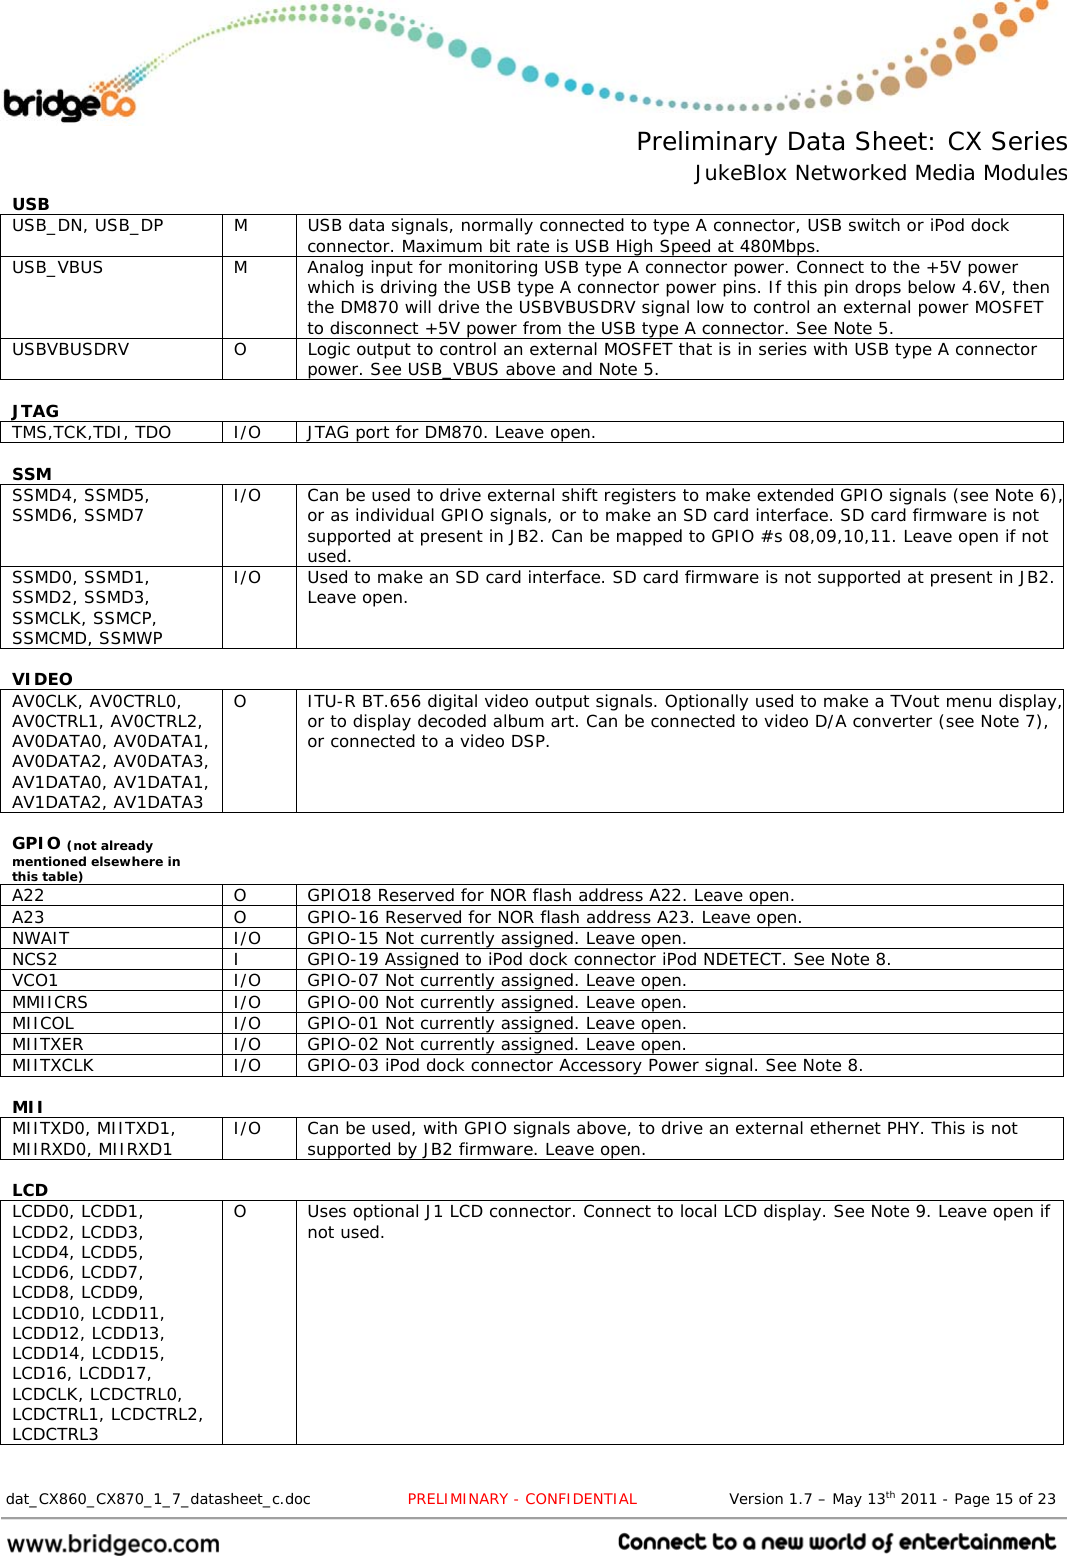  Preliminary Data Sheet: CX Series JukeBlox Networked Media Modules  dat_CX860_CX870_1_7_datasheet_c.doc                   PRELIMINARY - CONFIDENTIAL                  Version 1.7 – May 13th 2011 - Page 15 of 23                                  USB    USB_DN, USB_DP  M  USB data signals, normally connected to type A connector, USB switch or iPod dock connector. Maximum bit rate is USB High Speed at 480Mbps. USB_VBUS  M  Analog input for monitoring USB type A connector power. Connect to the +5V power which is driving the USB type A connector power pins. If this pin drops below 4.6V, then the DM870 will drive the USBVBUSDRV signal low to control an external power MOSFET to disconnect +5V power from the USB type A connector. See Note 5. USBVBUSDRV  O  Logic output to control an external MOSFET that is in series with USB type A connector power. See USB_VBUS above and Note 5.  JTAG    TMS,TCK,TDI, TDO  I/O  JTAG port for DM870. Leave open.  SSM    SSMD4, SSMD5, SSMD6, SSMD7  I/O  Can be used to drive external shift registers to make extended GPIO signals (see Note 6),or as individual GPIO signals, or to make an SD card interface. SD card firmware is not supported at present in JB2. Can be mapped to GPIO #s 08,09,10,11. Leave open if not used. SSMD0, SSMD1, SSMD2, SSMD3, SSMCLK, SSMCP, SSMCMD, SSMWP I/O  Used to make an SD card interface. SD card firmware is not supported at present in JB2. Leave open.  VIDEO    AV0CLK, AV0CTRL0, AV0CTRL1, AV0CTRL2, AV0DATA0, AV0DATA1, AV0DATA2, AV0DATA3, AV1DATA0, AV1DATA1, AV1DATA2, AV1DATA3  O  ITU-R BT.656 digital video output signals. Optionally used to make a TVout menu display, or to display decoded album art. Can be connected to video D/A converter (see Note 7), or connected to a video DSP.  GPIO (not already mentioned elsewhere in this table)   A22  O  GPIO18 Reserved for NOR flash address A22. Leave open. A23  O  GPIO-16 Reserved for NOR flash address A23. Leave open. NWAIT  I/O  GPIO-15 Not currently assigned. Leave open. NCS2  I  GPIO-19 Assigned to iPod dock connector iPod NDETECT. See Note 8. VCO1  I/O  GPIO-07 Not currently assigned. Leave open. MMIICRS  I/O  GPIO-00 Not currently assigned. Leave open. MIICOL  I/O  GPIO-01 Not currently assigned. Leave open. MIITXER  I/O  GPIO-02 Not currently assigned. Leave open. MIITXCLK  I/O  GPIO-03 iPod dock connector Accessory Power signal. See Note 8.  MII    MIITXD0, MIITXD1, MIIRXD0, MIIRXD1  I/O  Can be used, with GPIO signals above, to drive an external ethernet PHY. This is not supported by JB2 firmware. Leave open.  LCD    LCDD0, LCDD1, LCDD2, LCDD3, LCDD4, LCDD5, LCDD6, LCDD7, LCDD8, LCDD9, LCDD10, LCDD11, LCDD12, LCDD13, LCDD14, LCDD15, LCD16, LCDD17, LCDCLK, LCDCTRL0, LCDCTRL1, LCDCTRL2, LCDCTRL3 O  Uses optional J1 LCD connector. Connect to local LCD display. See Note 9. Leave open if not used. 